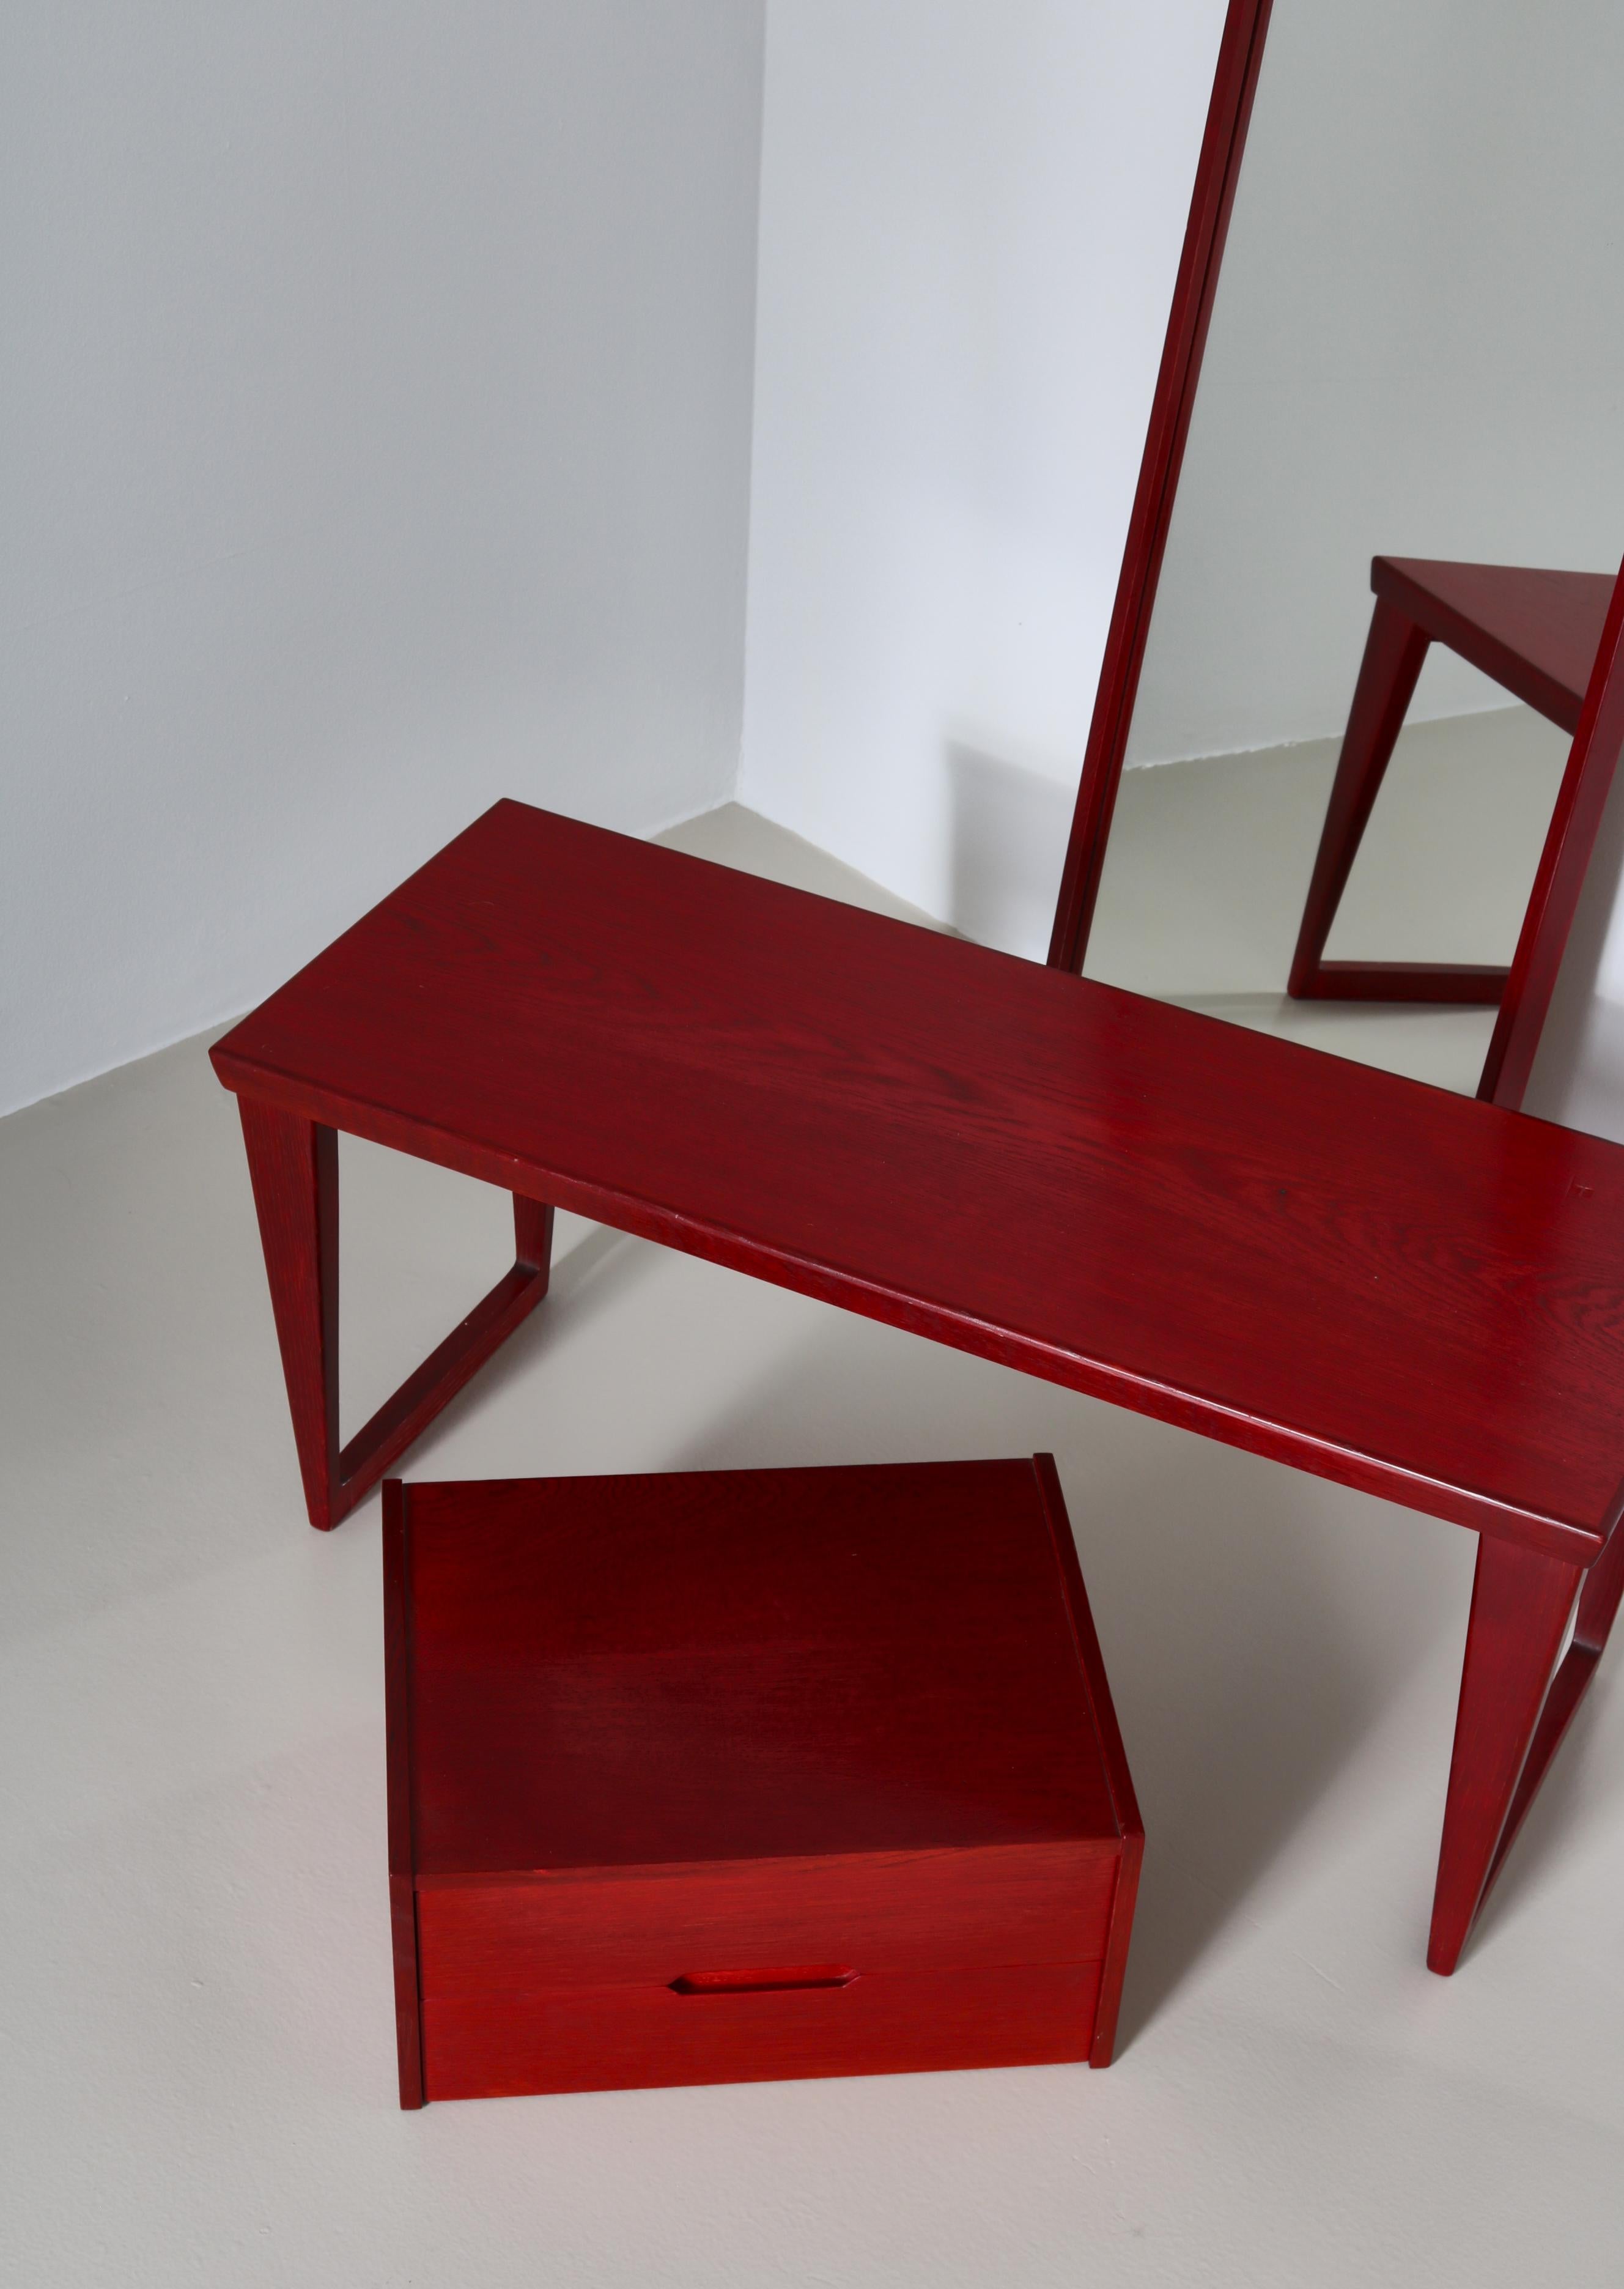 Stained Danish Modern Red Hallway Set Bench, Drawers & Mirror, Aksel Kjersgaard, 1960s For Sale